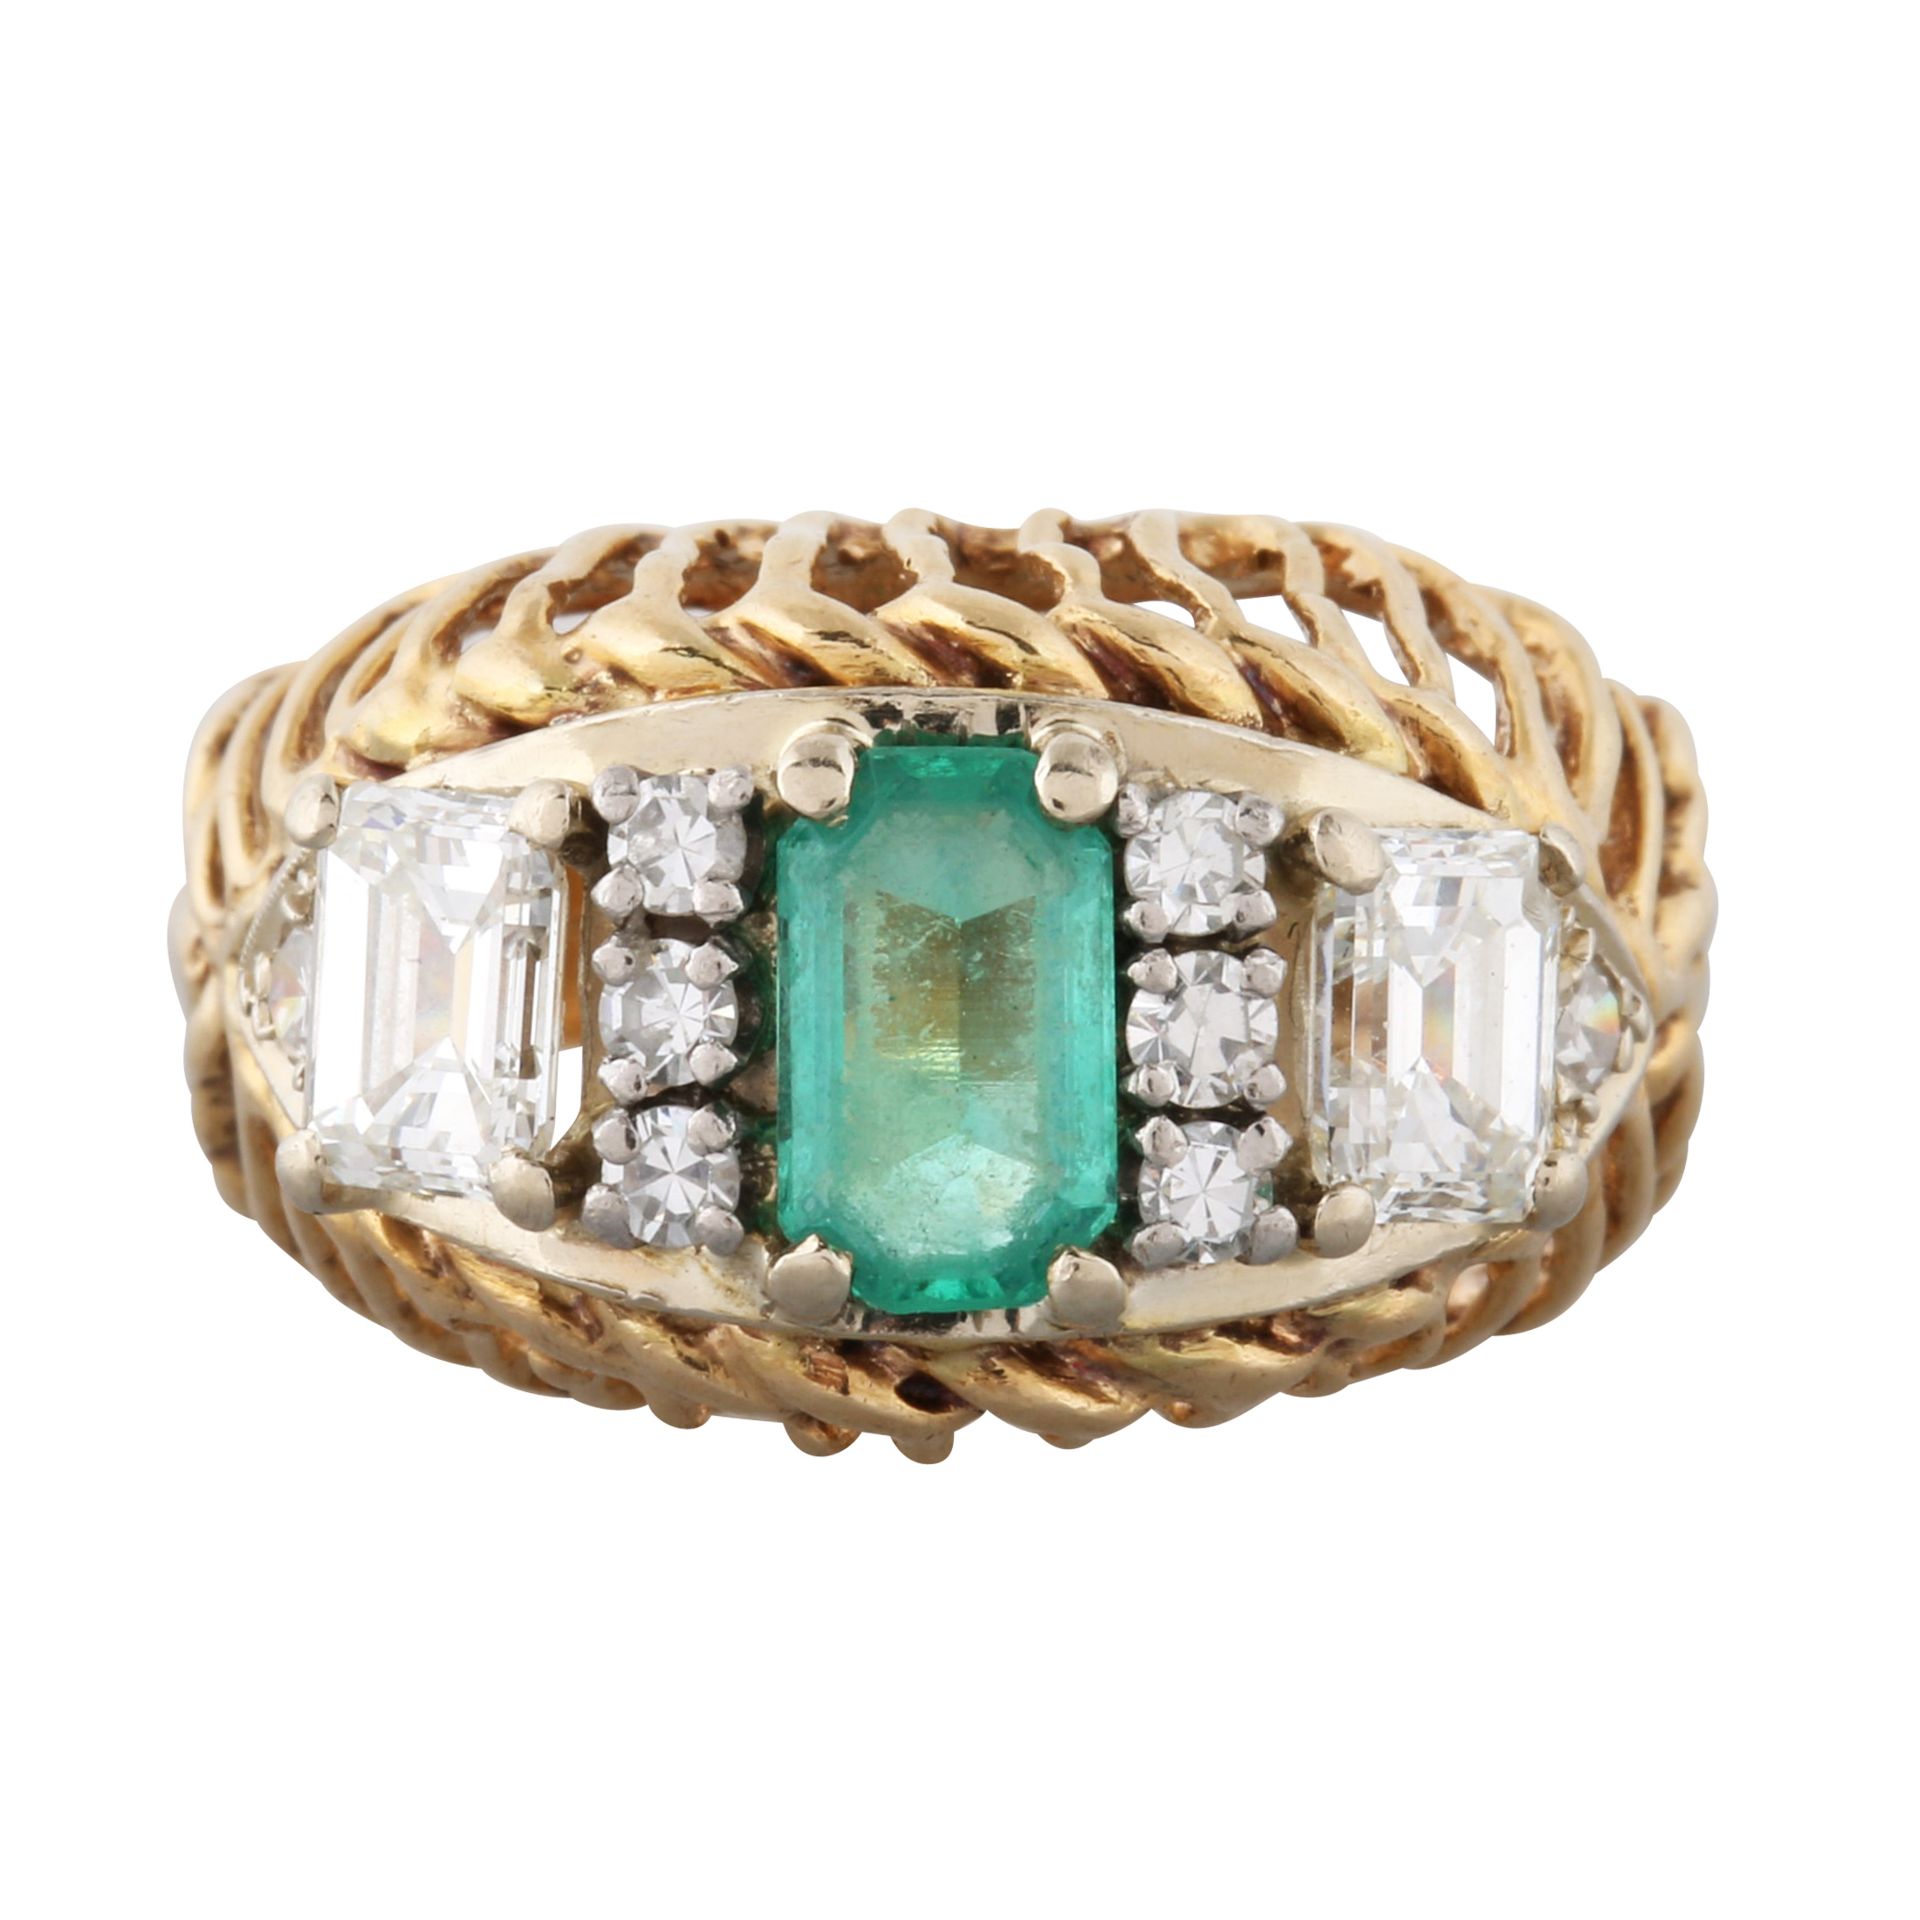 14K GOLD RING WITH EMERALD